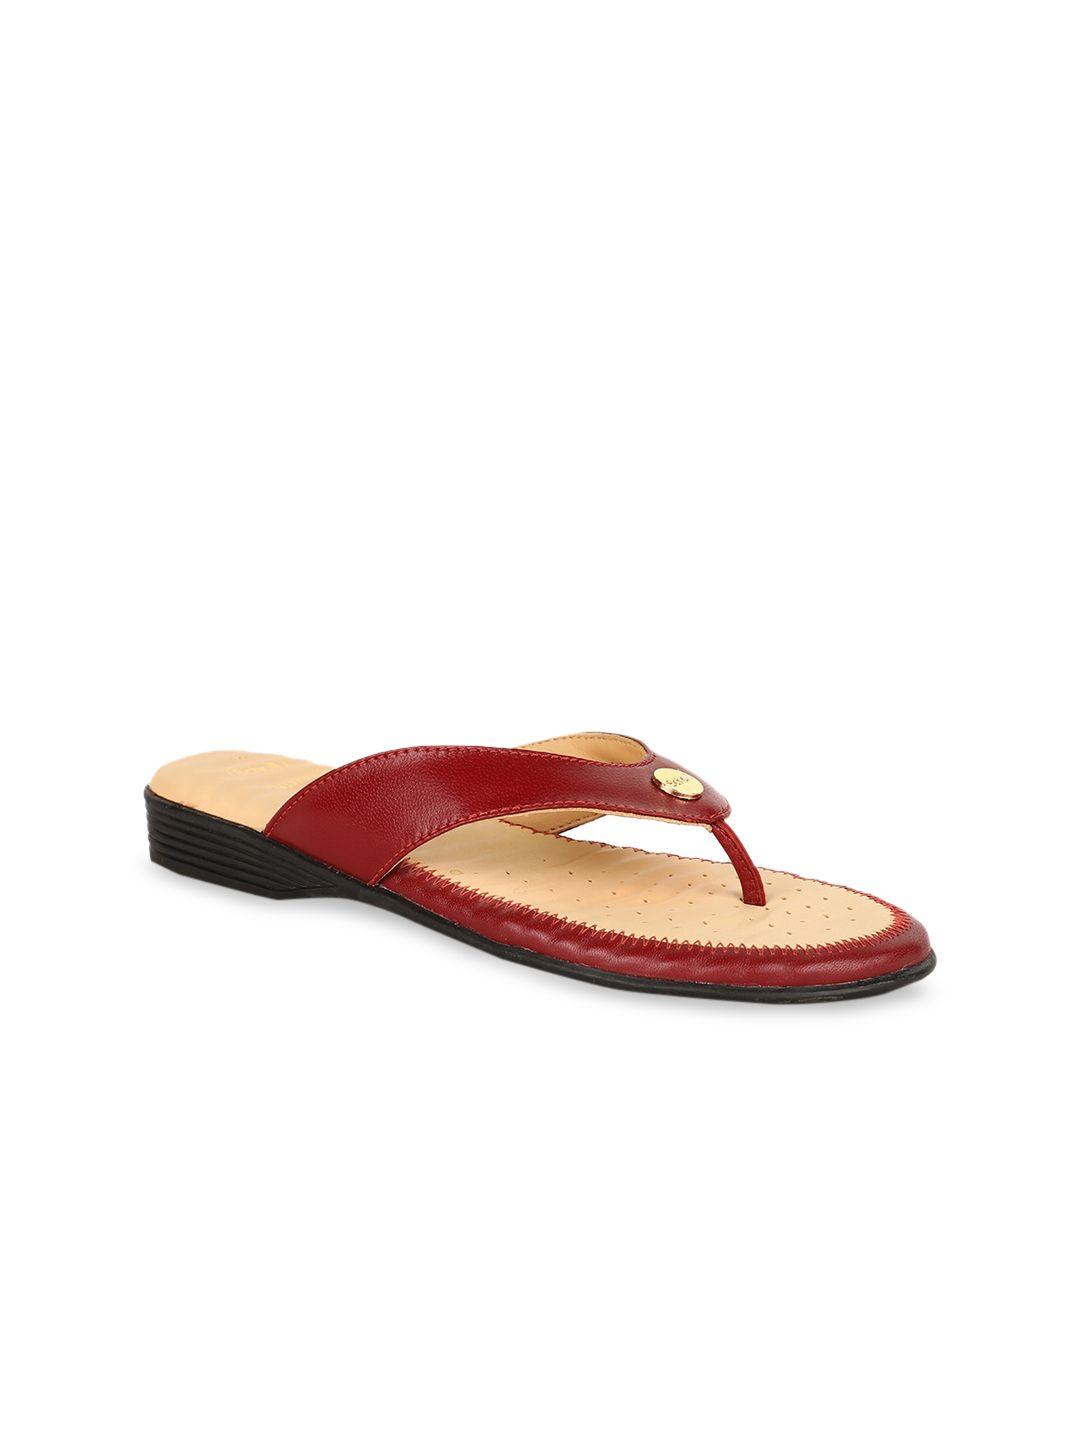 scholl women red solid leather open toe flats